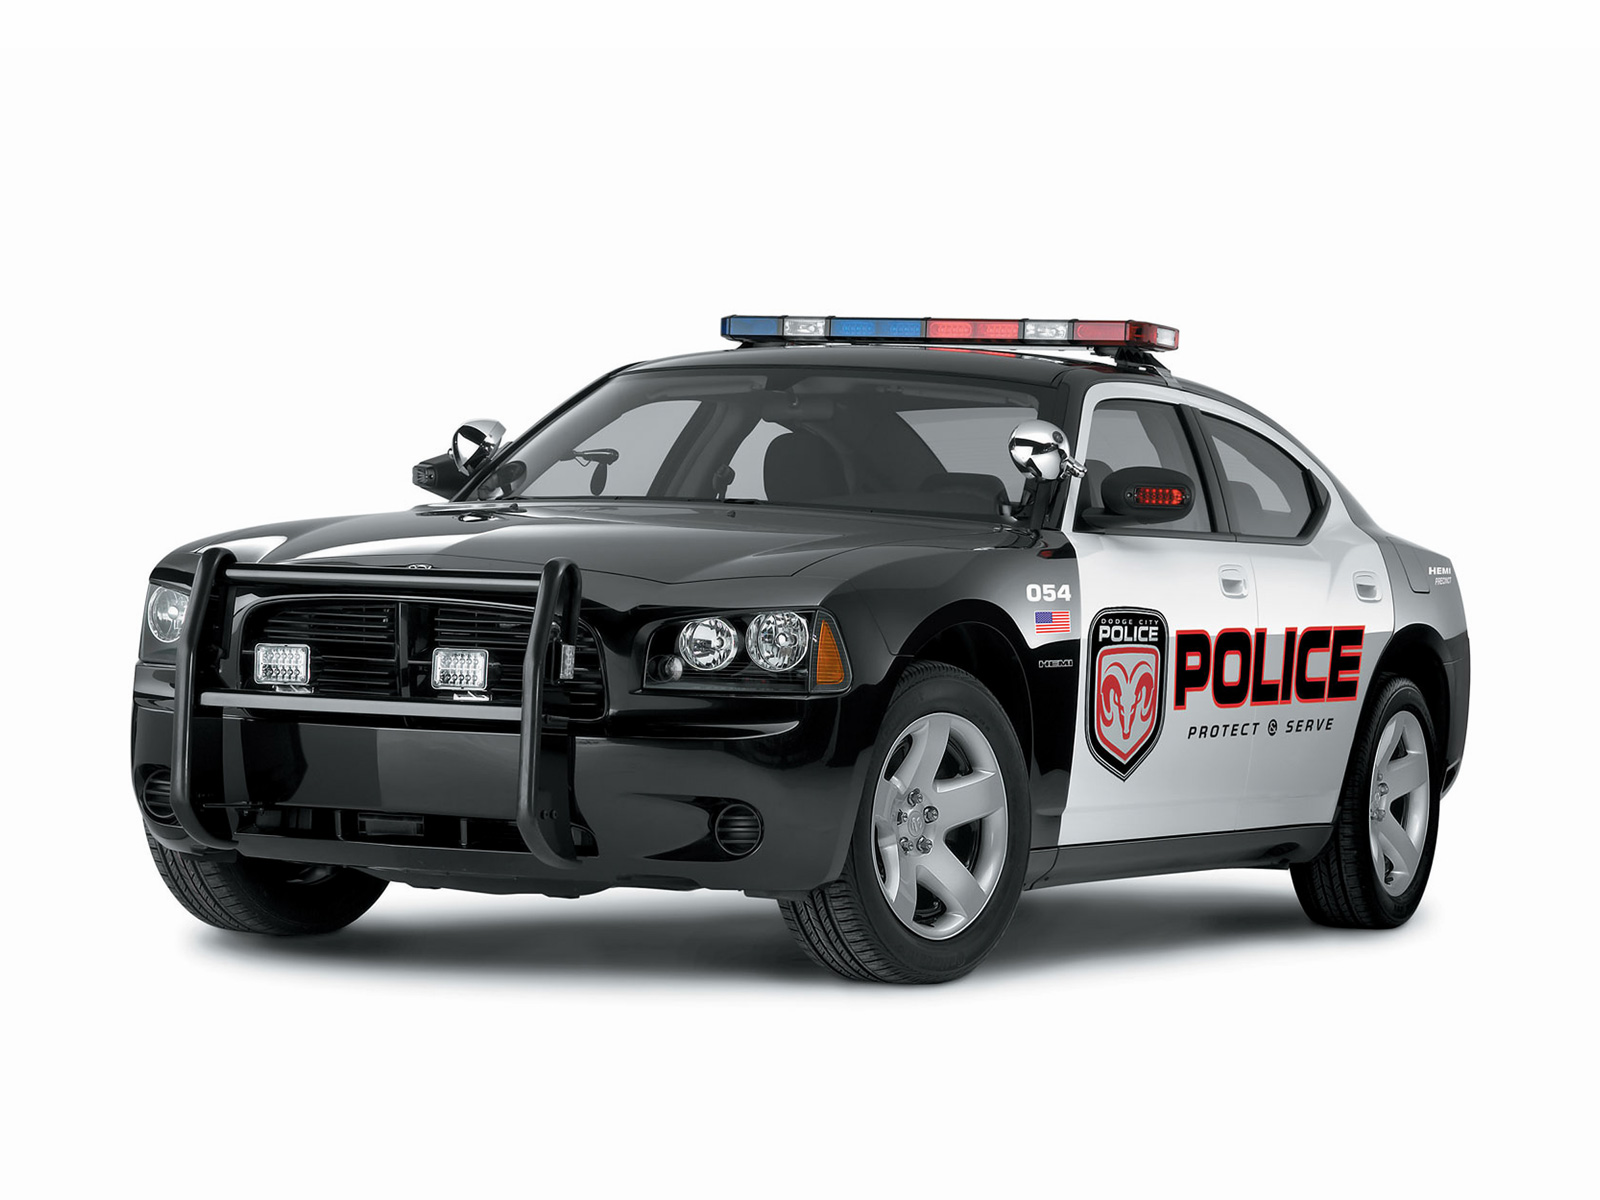 Dodge police car wallpapers and images   wallpapers pictures photos